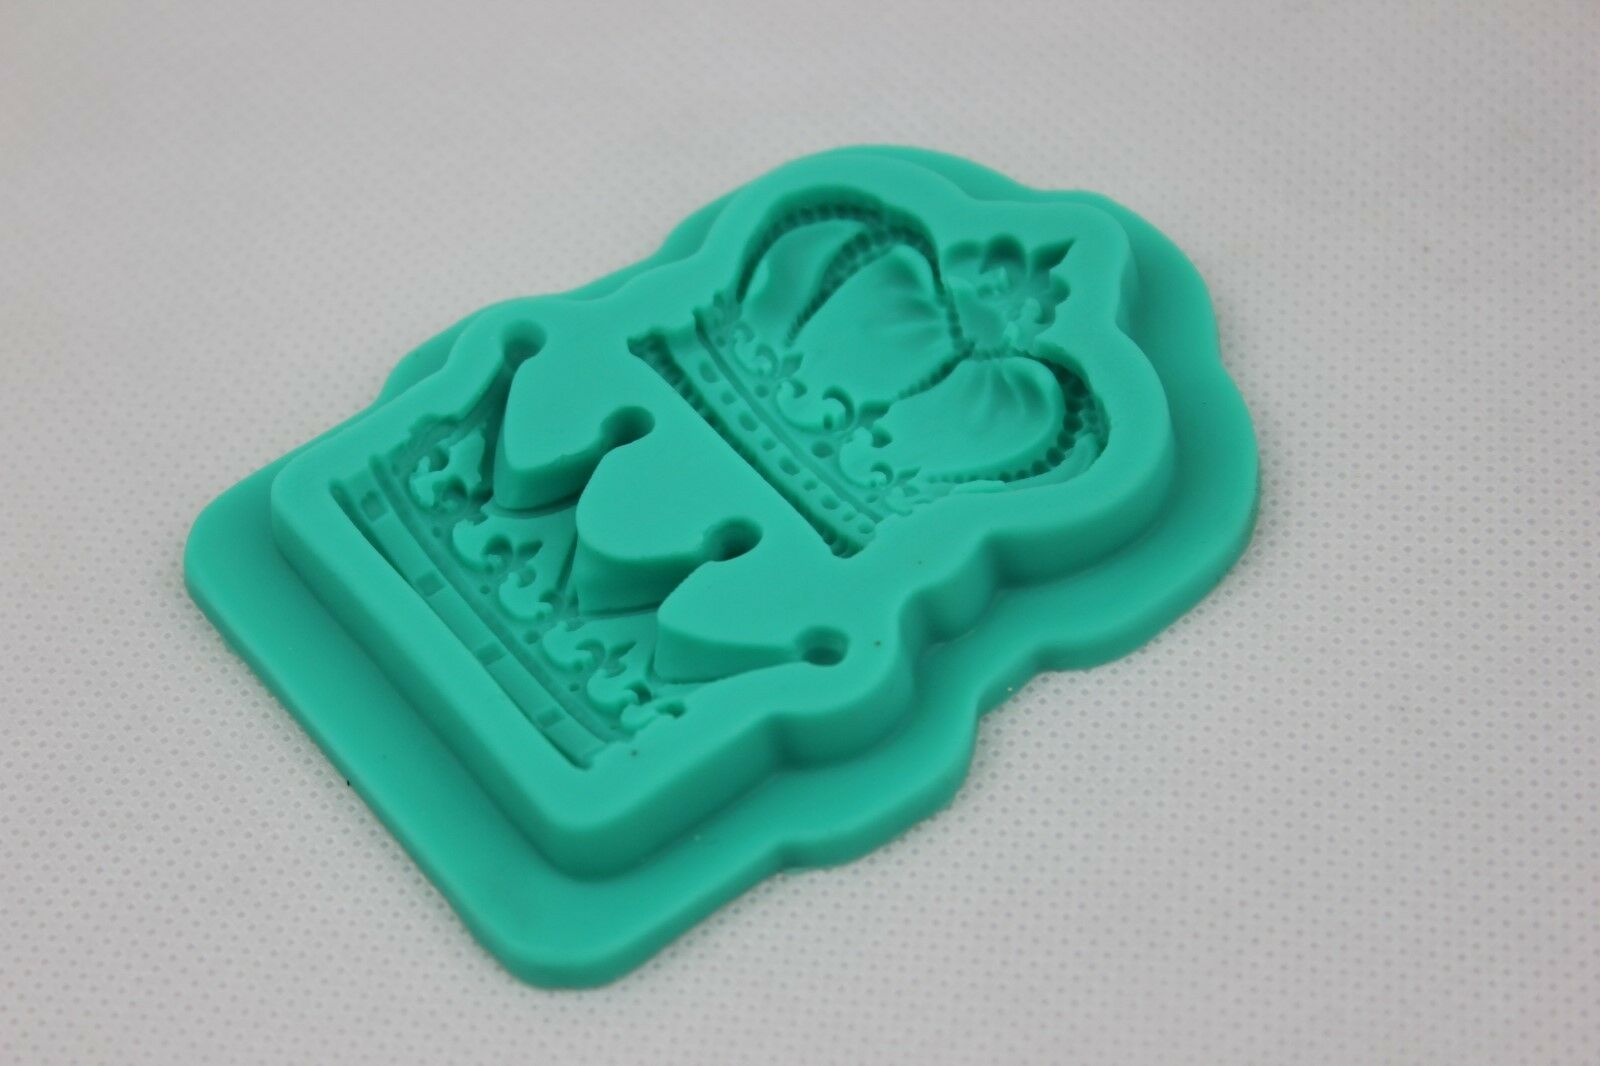 attachment-https://www.cupcakeaddicts.co.uk/wp-content/uploads/imported/3/Crown-Royal-baby-Prince-Princess-Silicone-Mould-Cake-Chocolate-Icing-Bake-Decor-323147589533-6.jpg